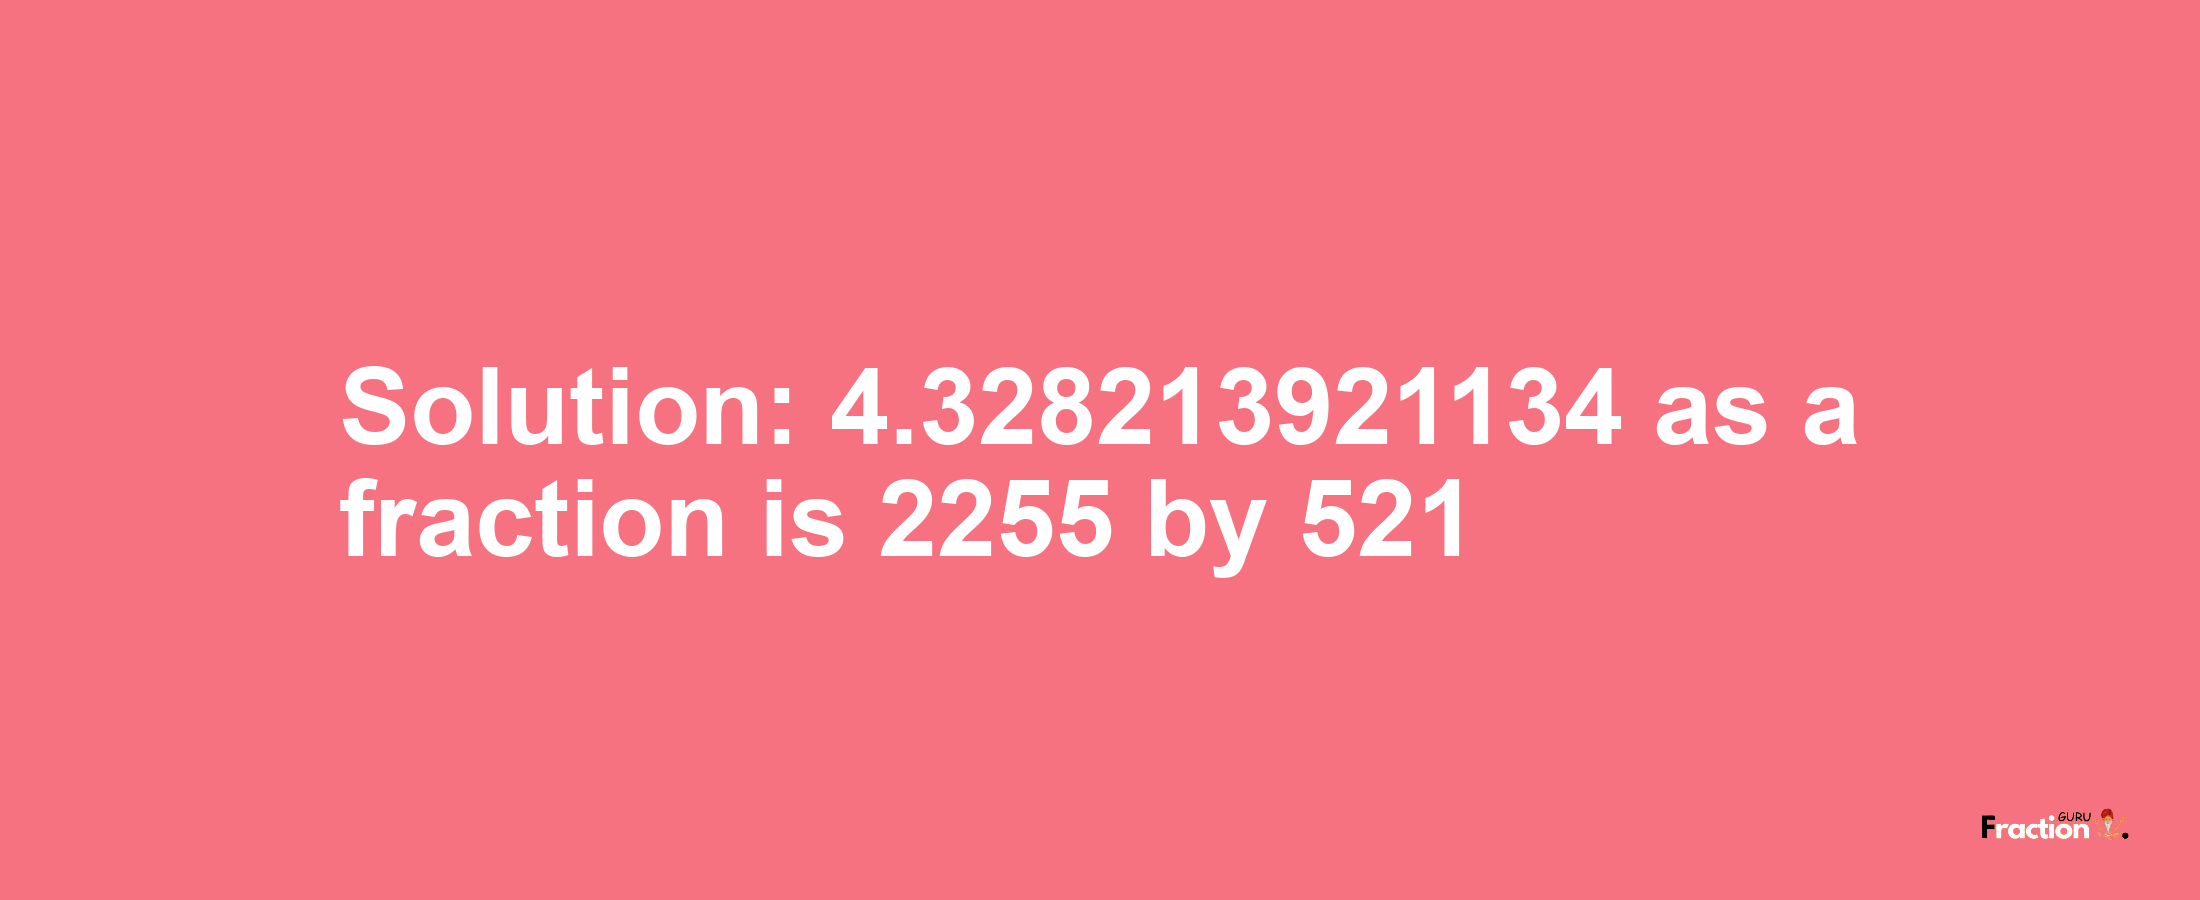 Solution:4.328213921134 as a fraction is 2255/521